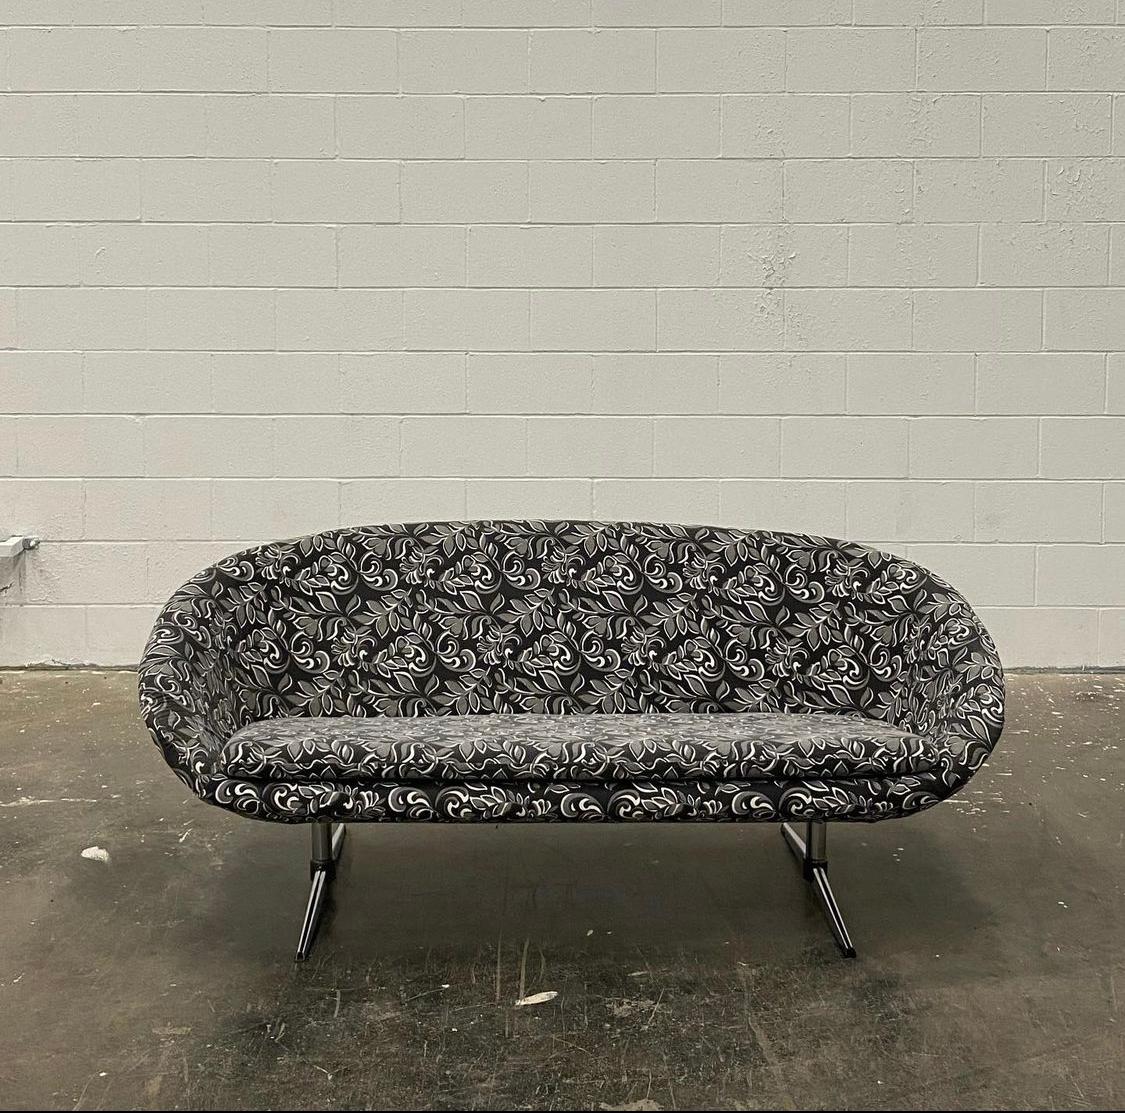 This sculptural molded urethane foam construction sofa is very light weight but durable. This iconic piece was manufactured by Swedish producer Overman for their U.S.A. division.